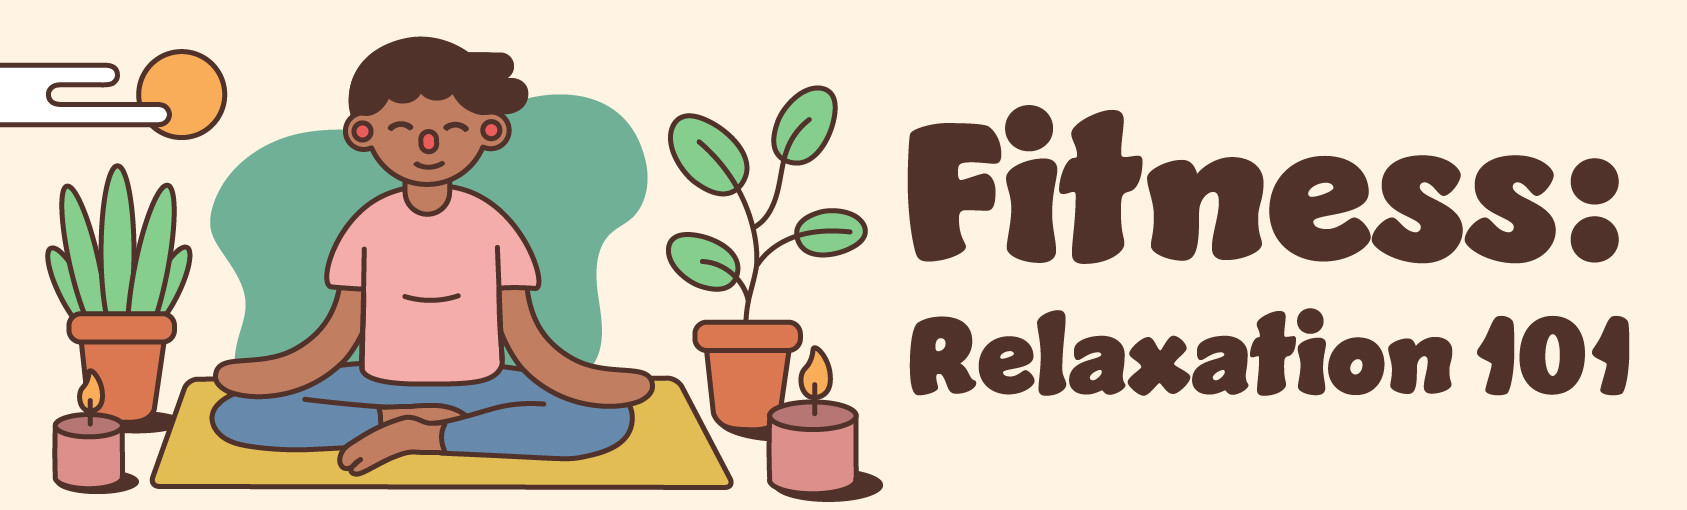 Fitness: Relaxation 101 banner